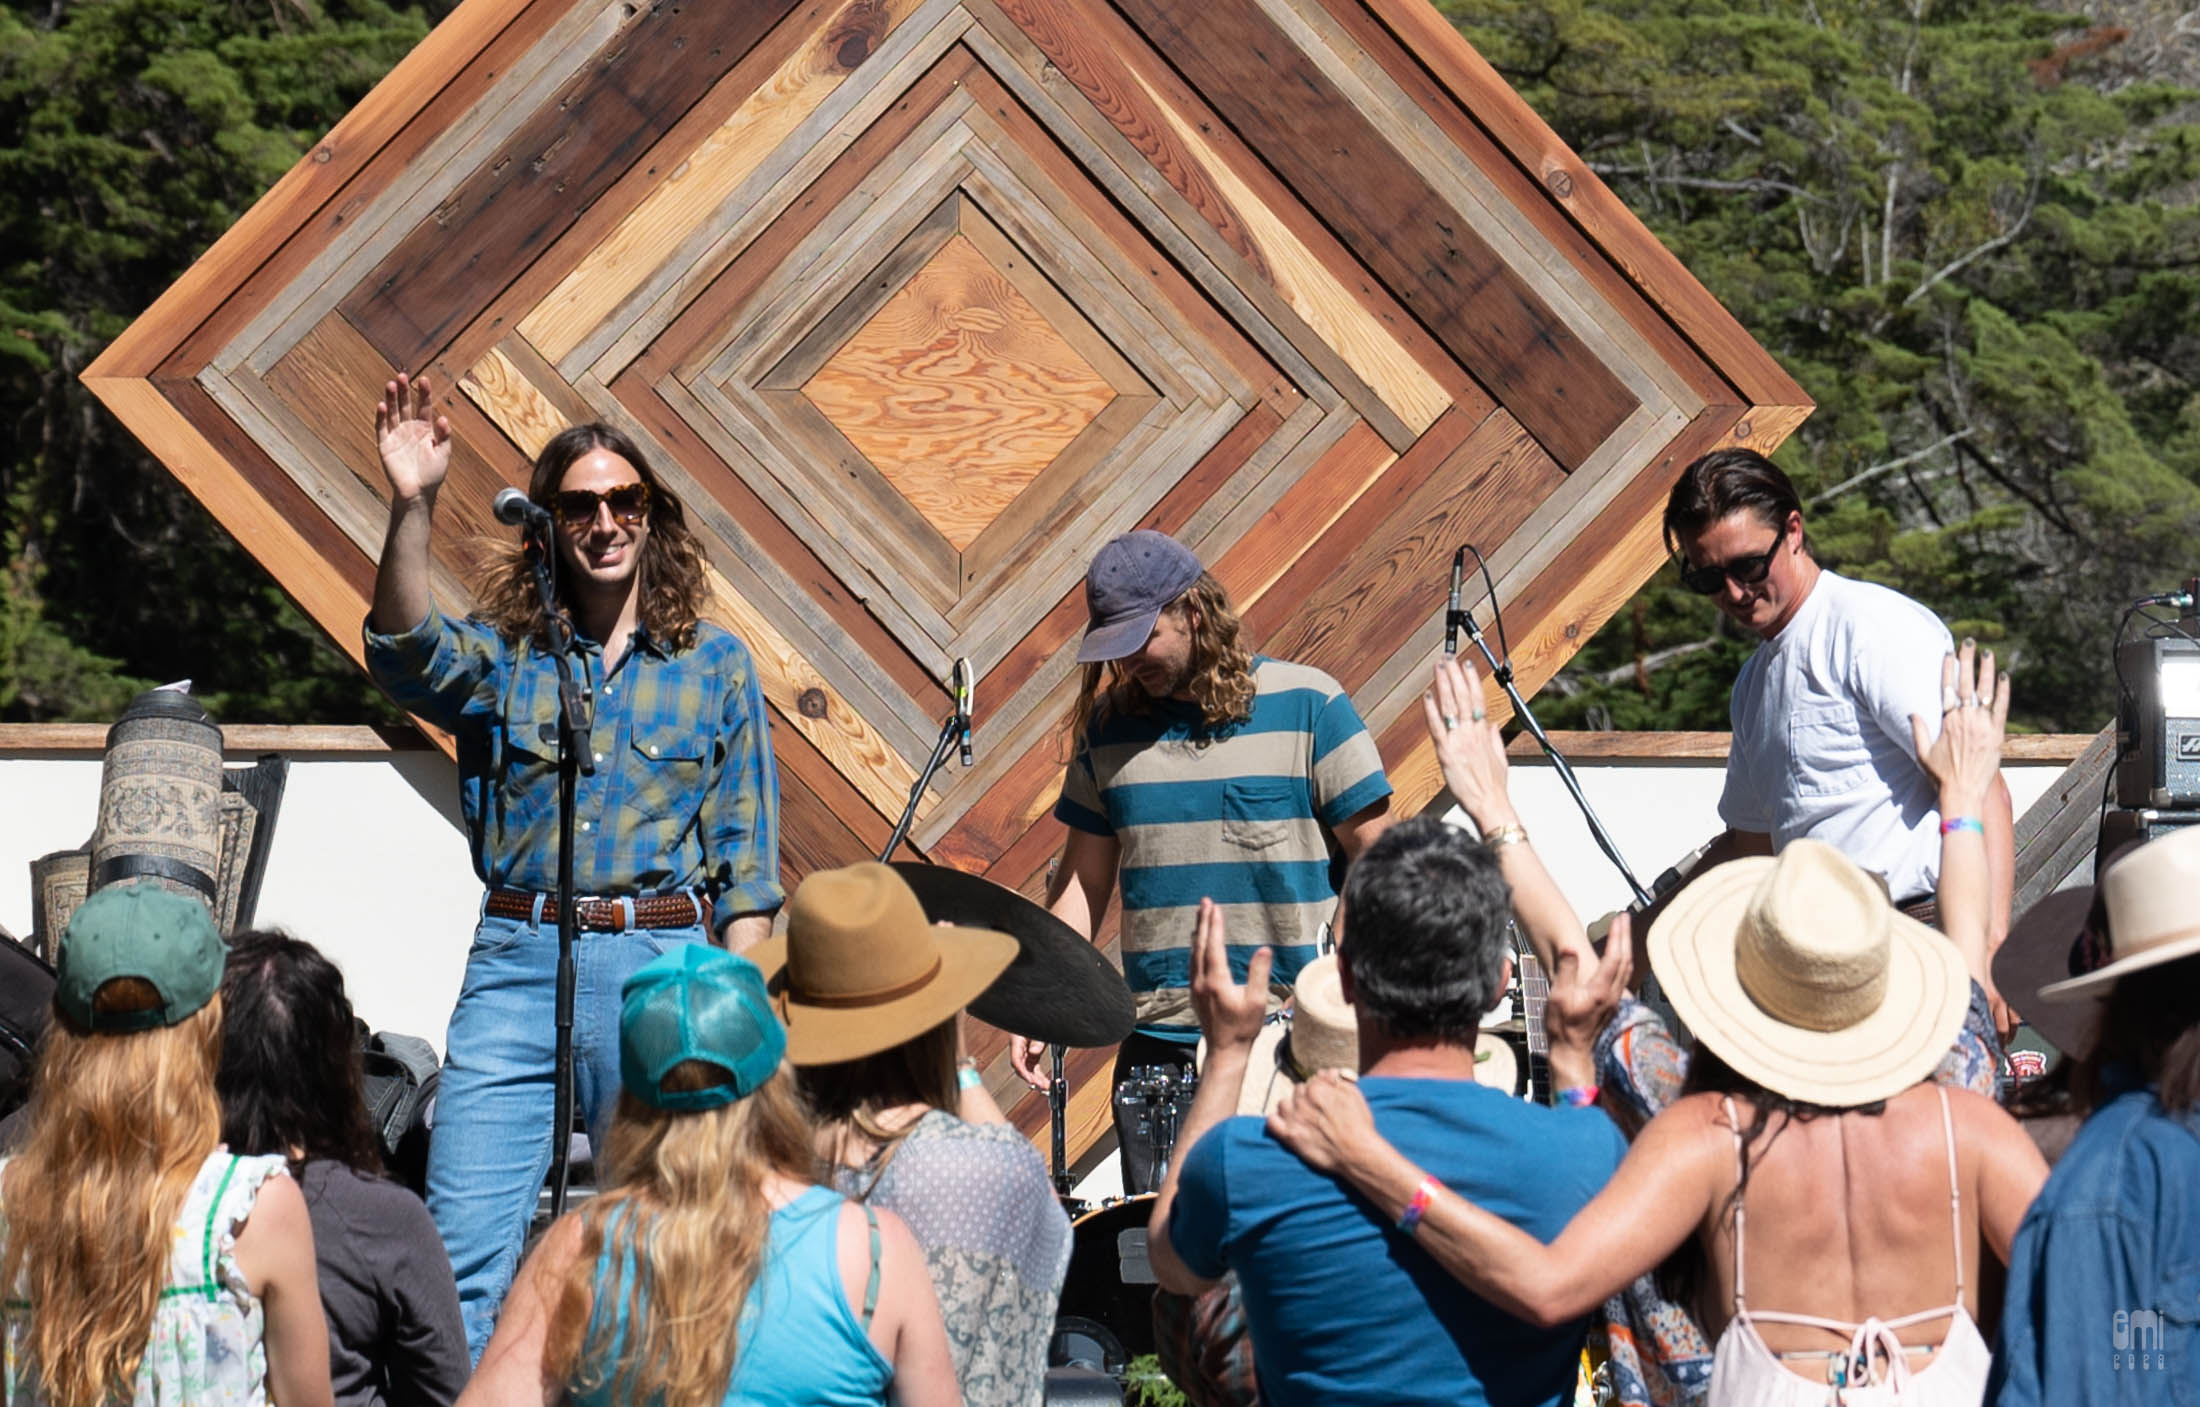 2023.5.20 HIPNIC XIV - MAPACHE at Fernwood, Campground and Resort Big Sur CA. photo by emi